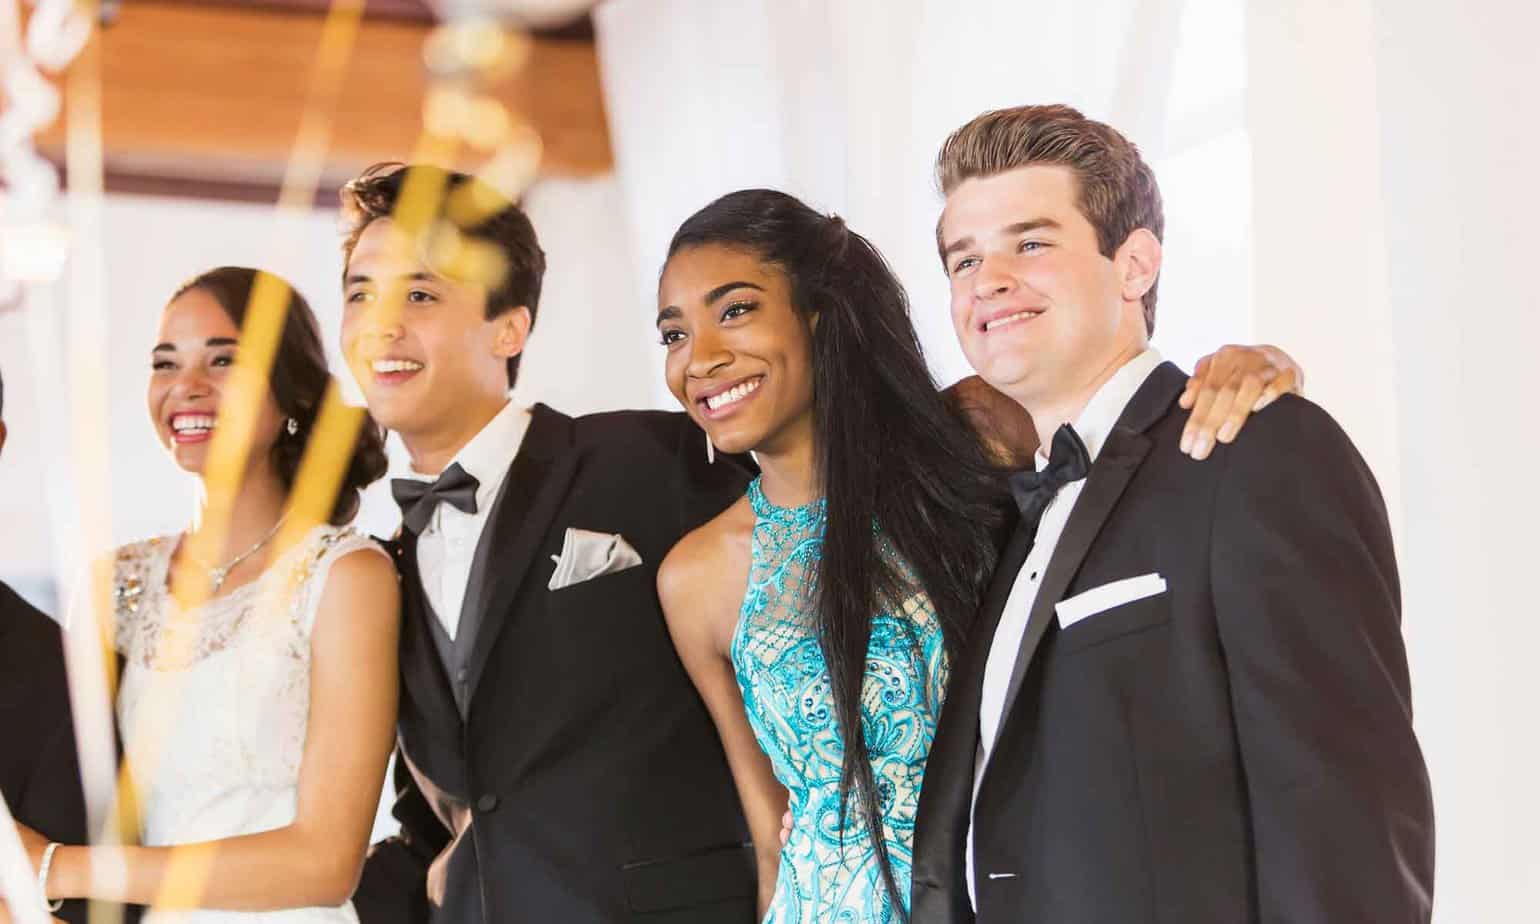 4 Reasons Why You Shouldn’t Drink on Prom Night